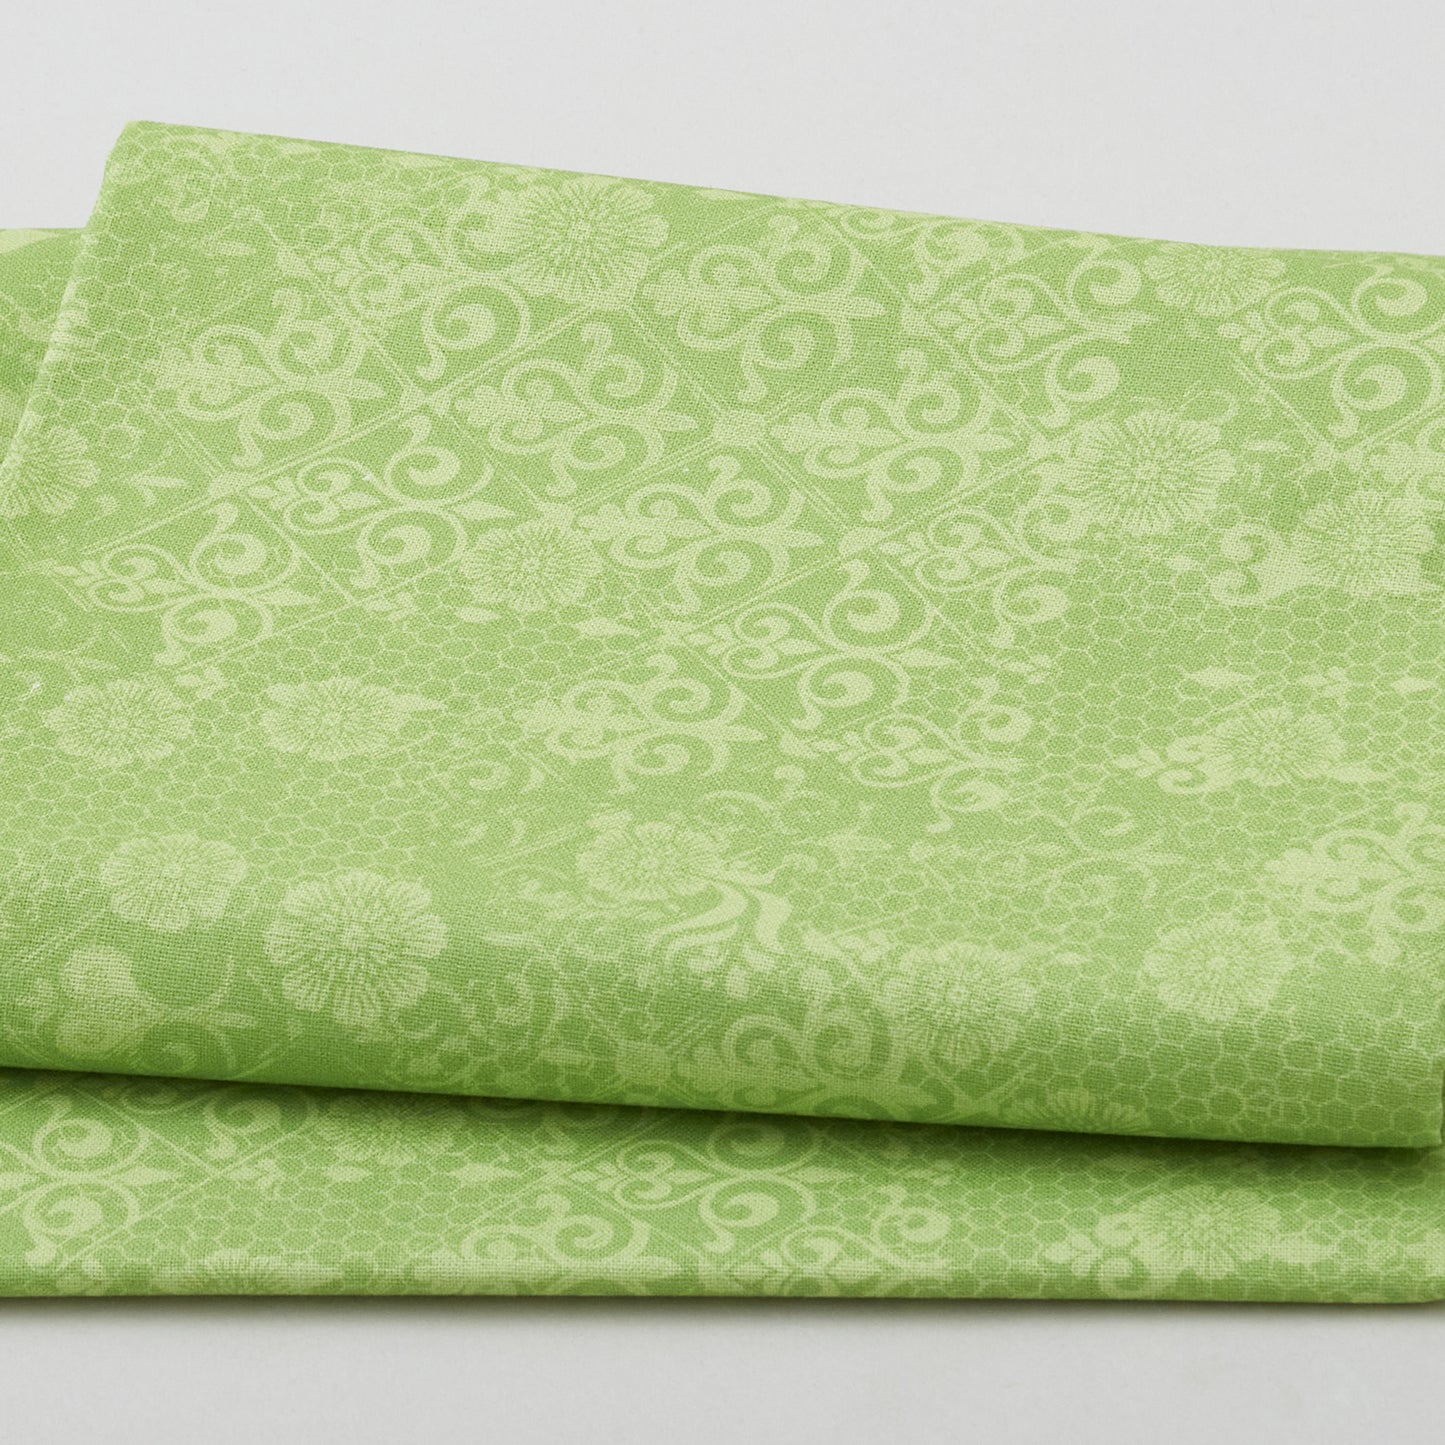 Mixed Medallion Blender - Lime 2 Yard Cut Primary Image